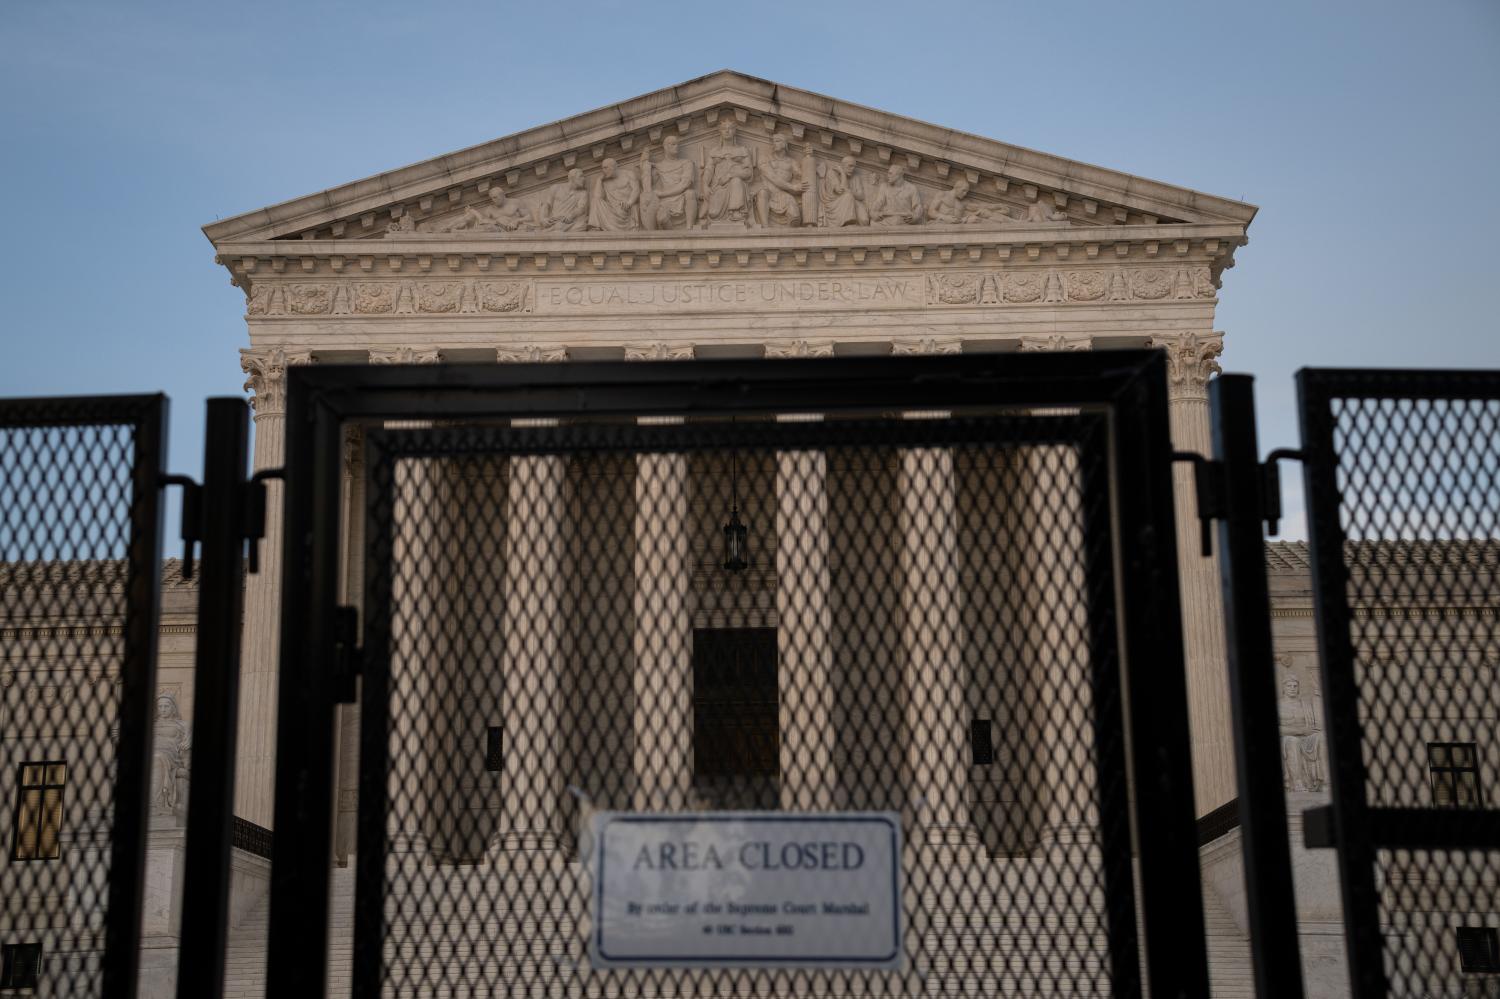 A general view of the U.S. Supreme Court, in Washington, D.C., on Thursday, July 21, 2022